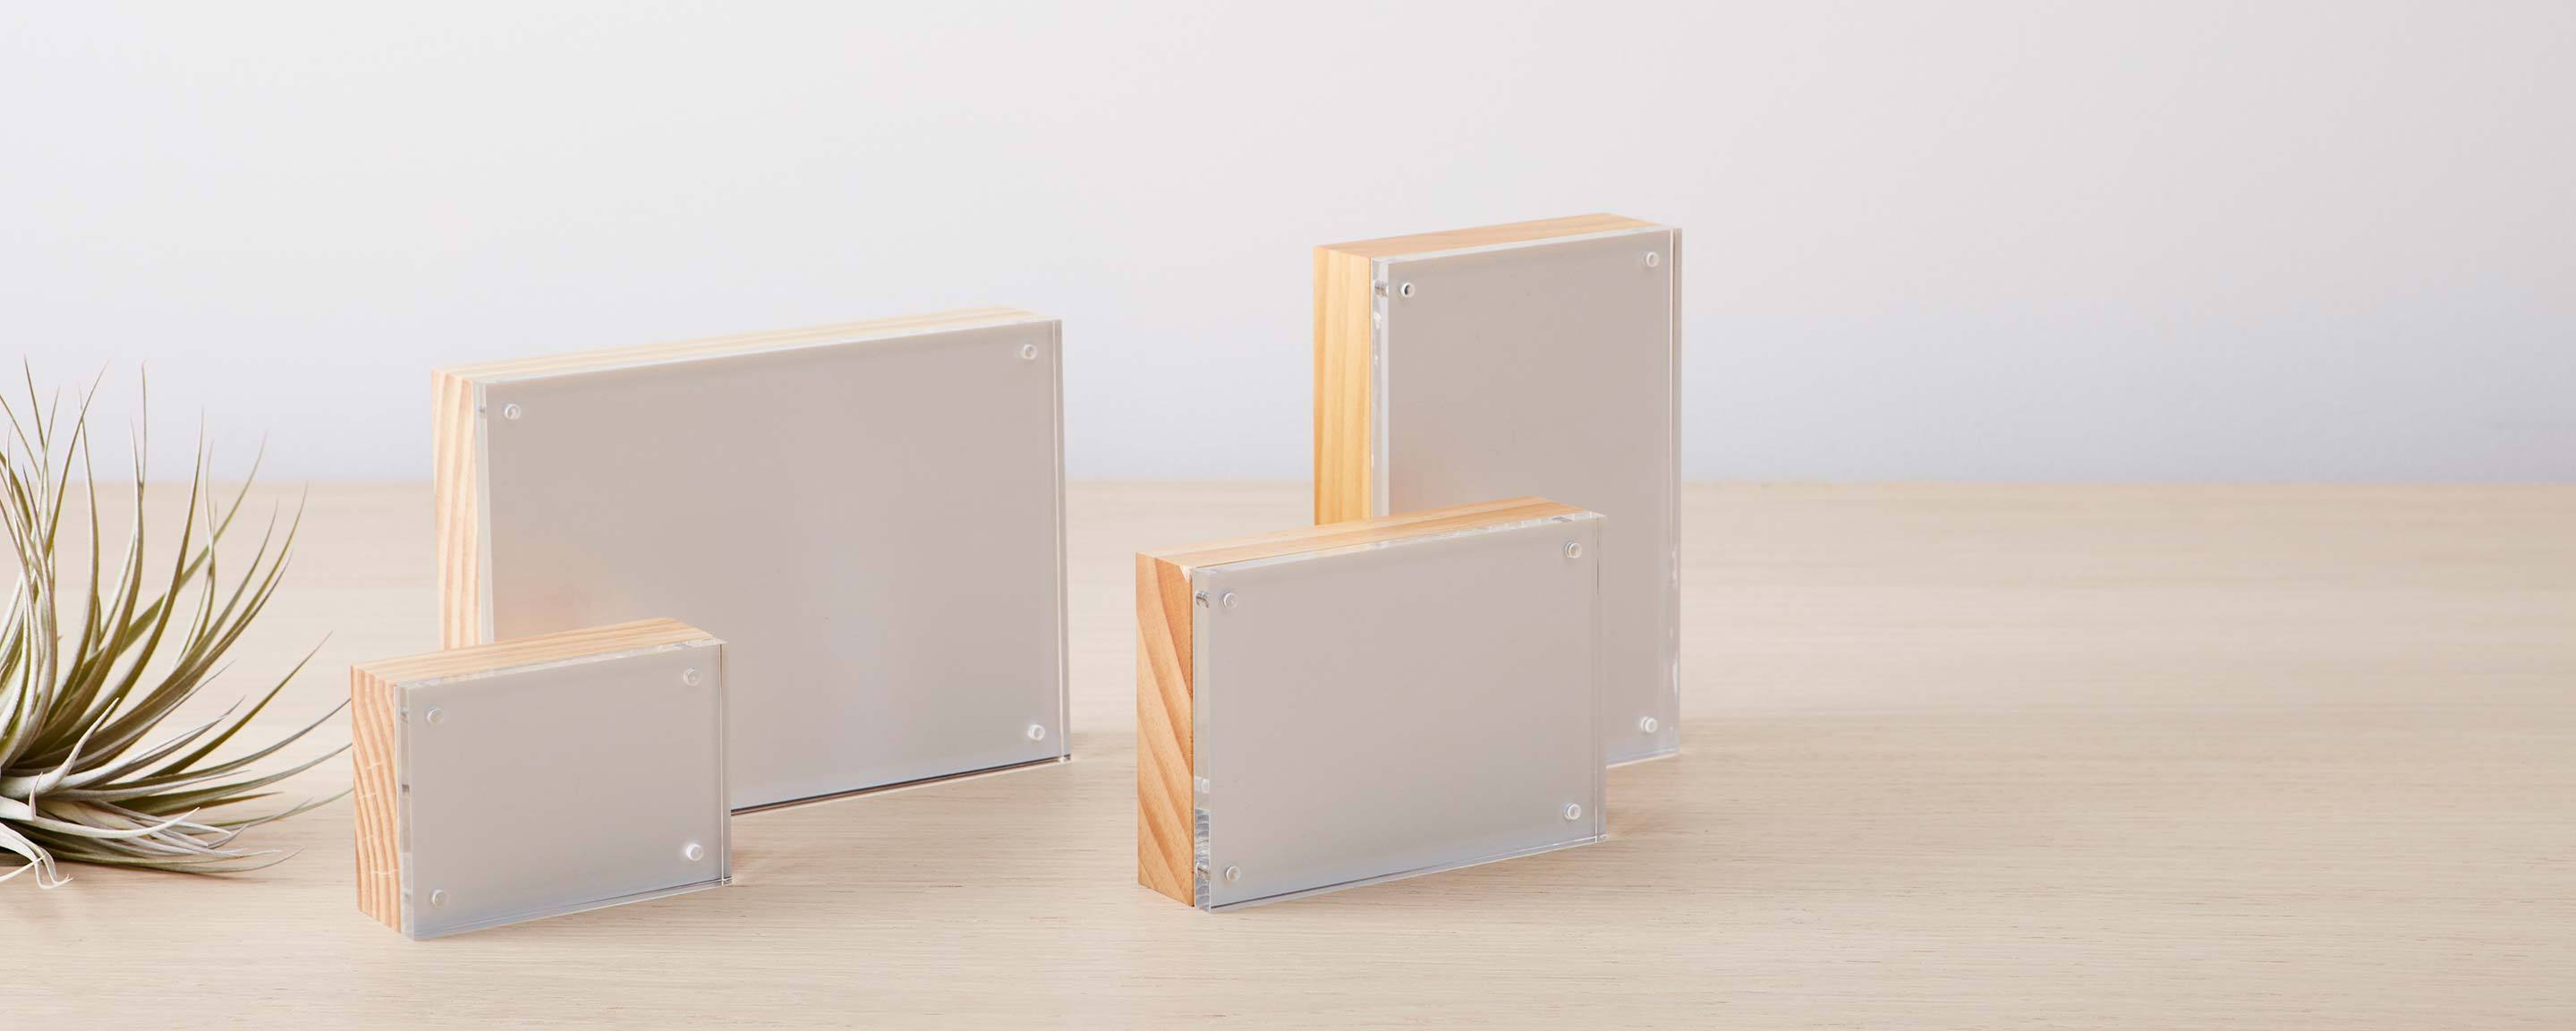 lucite and wood block picture frames